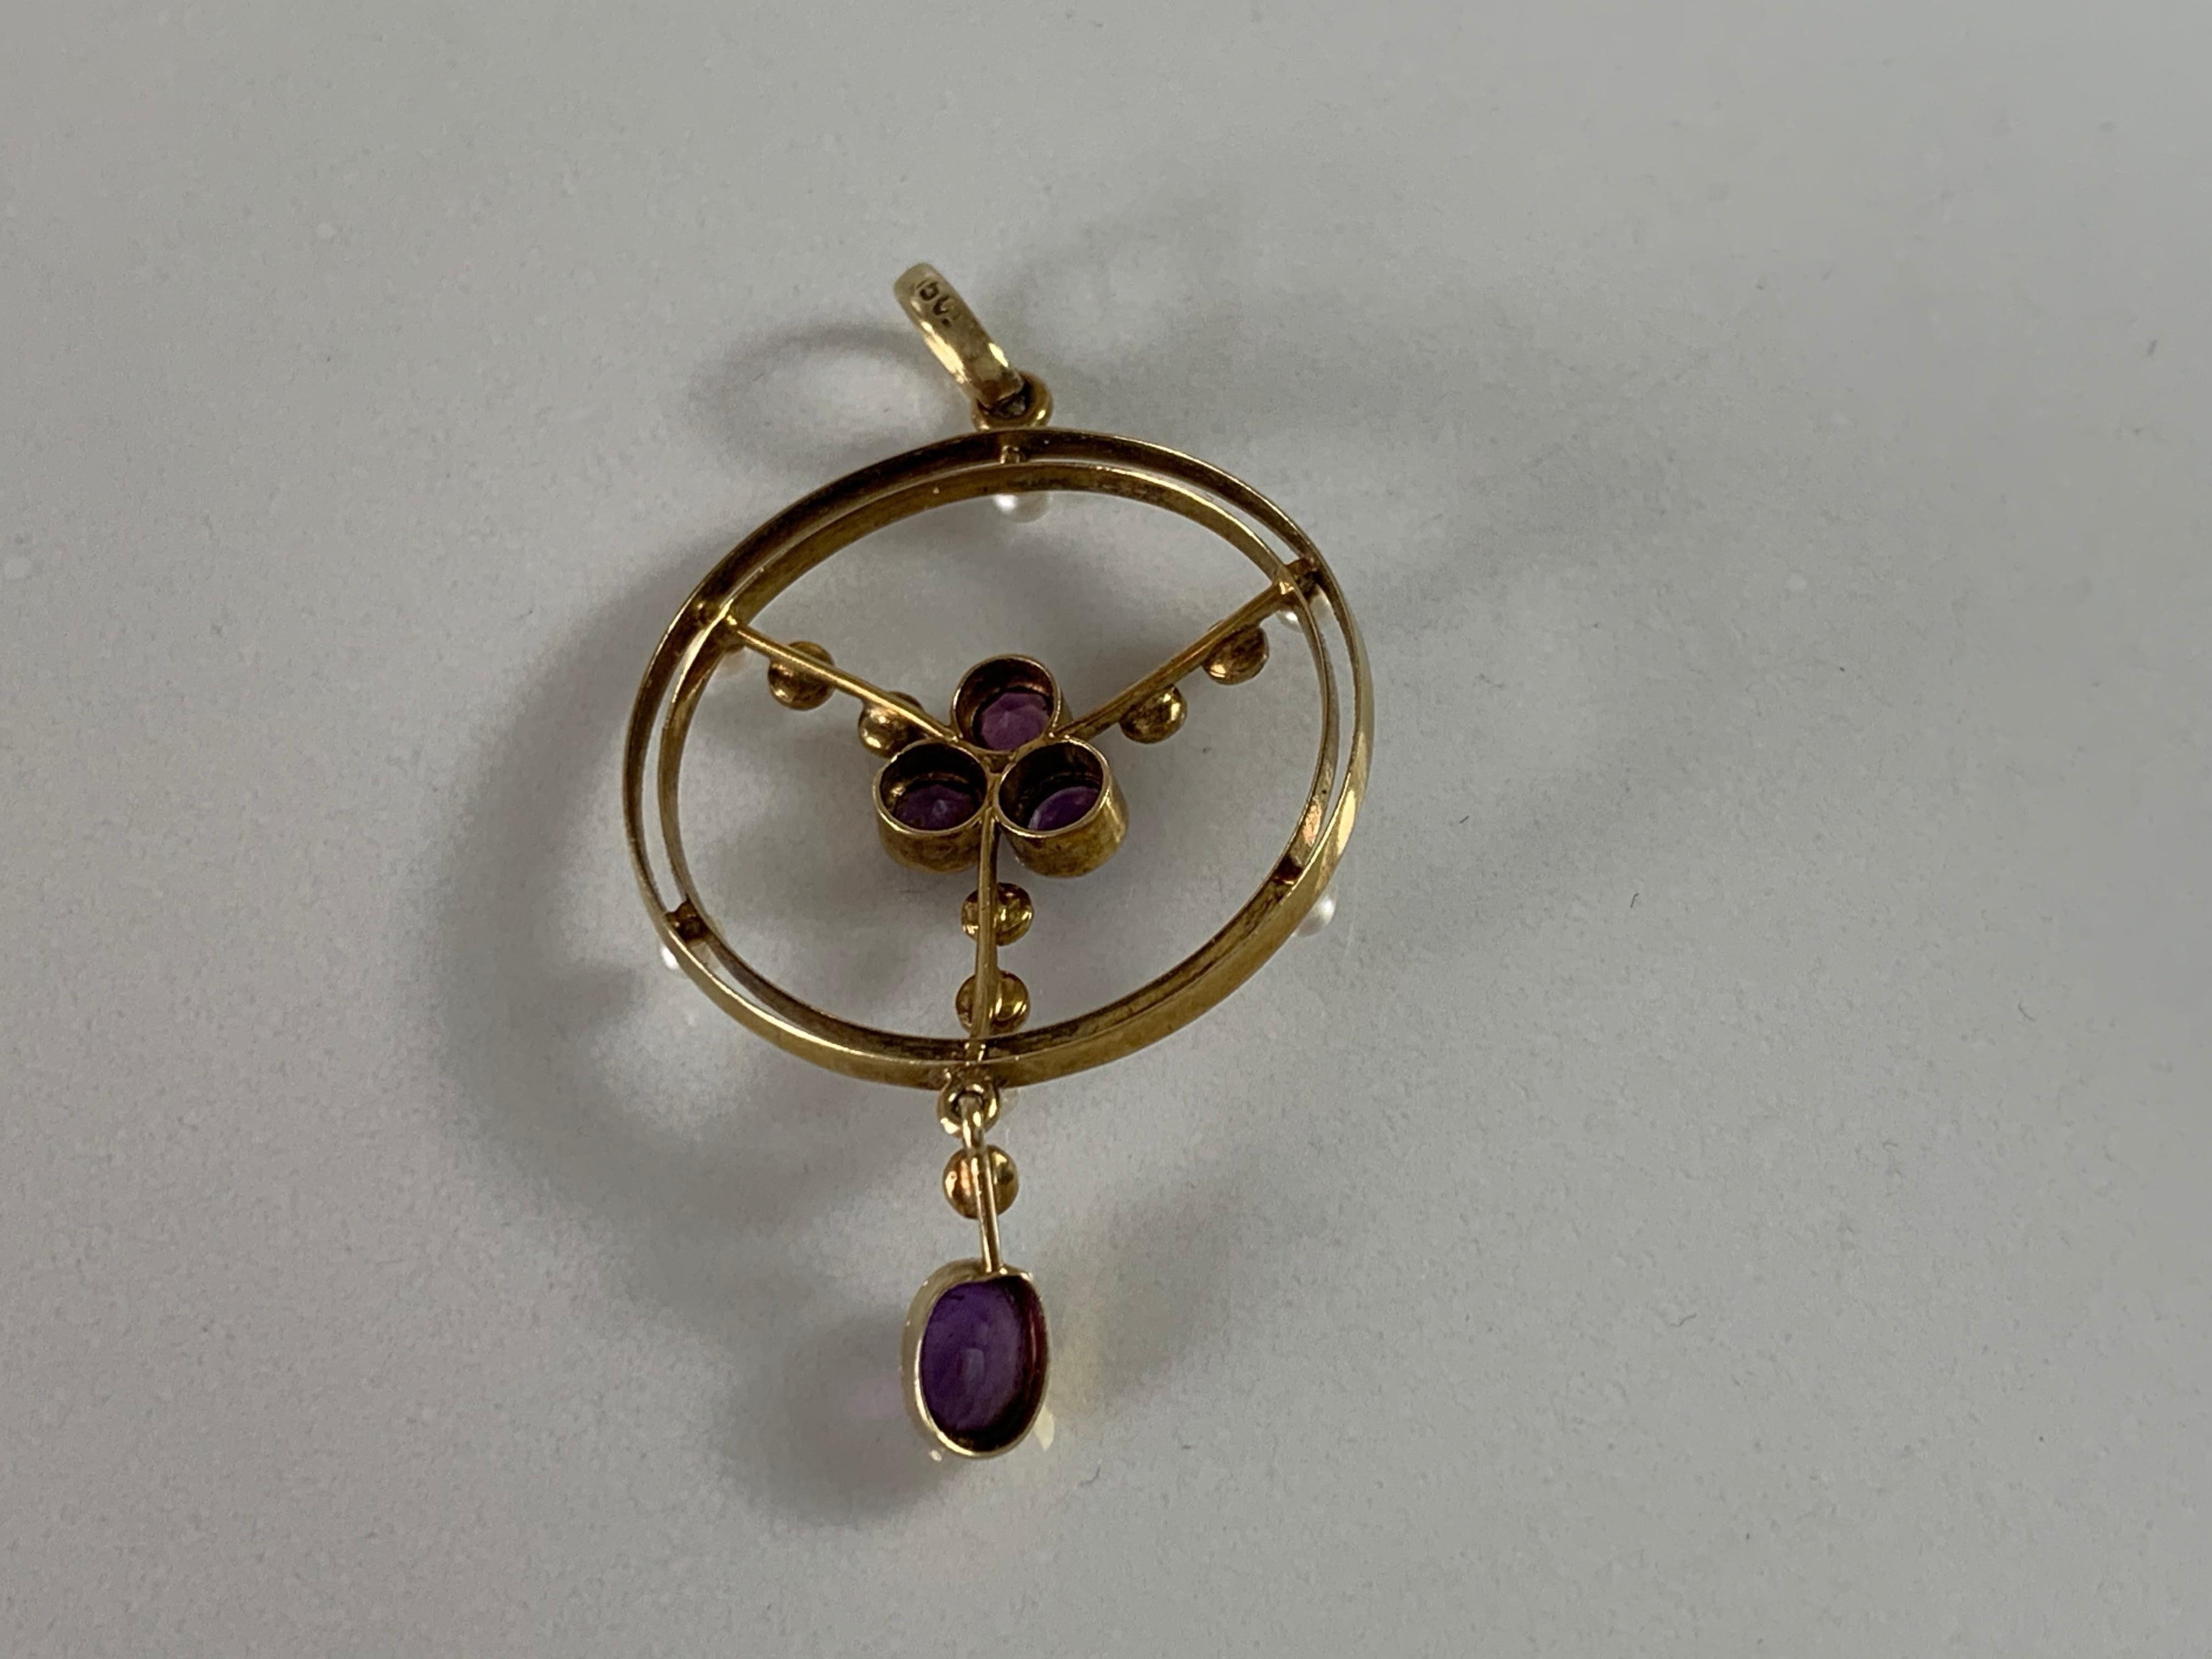 15ct 585 Gold Antique Pearl & Amethyst Pendant For Sale 1